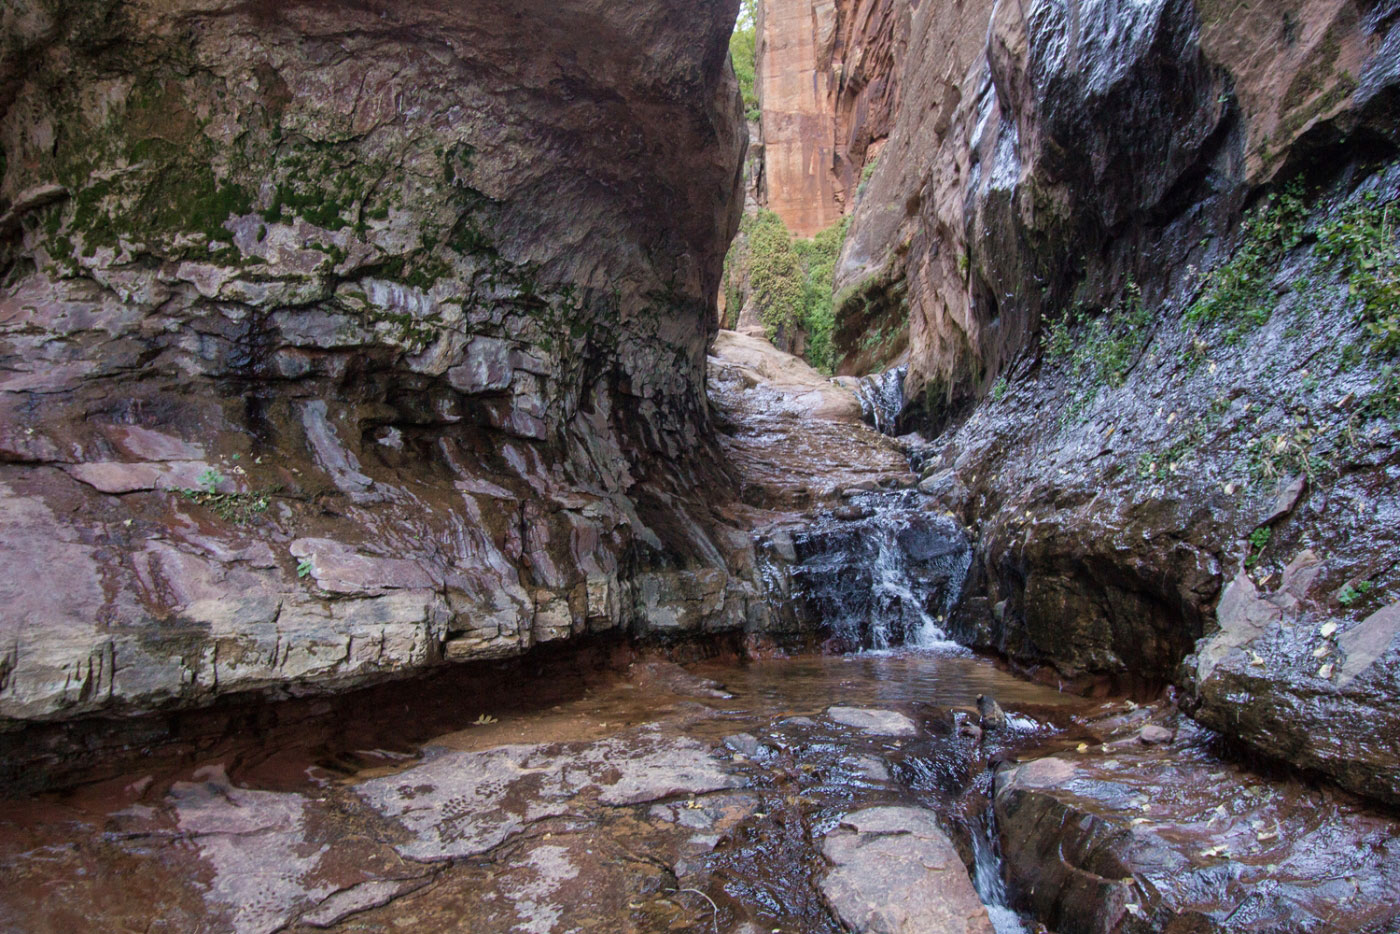 Canyoneer Water Canyon in Canaan Mountain Wilderness Area BLM, Utah - Stav is Lost